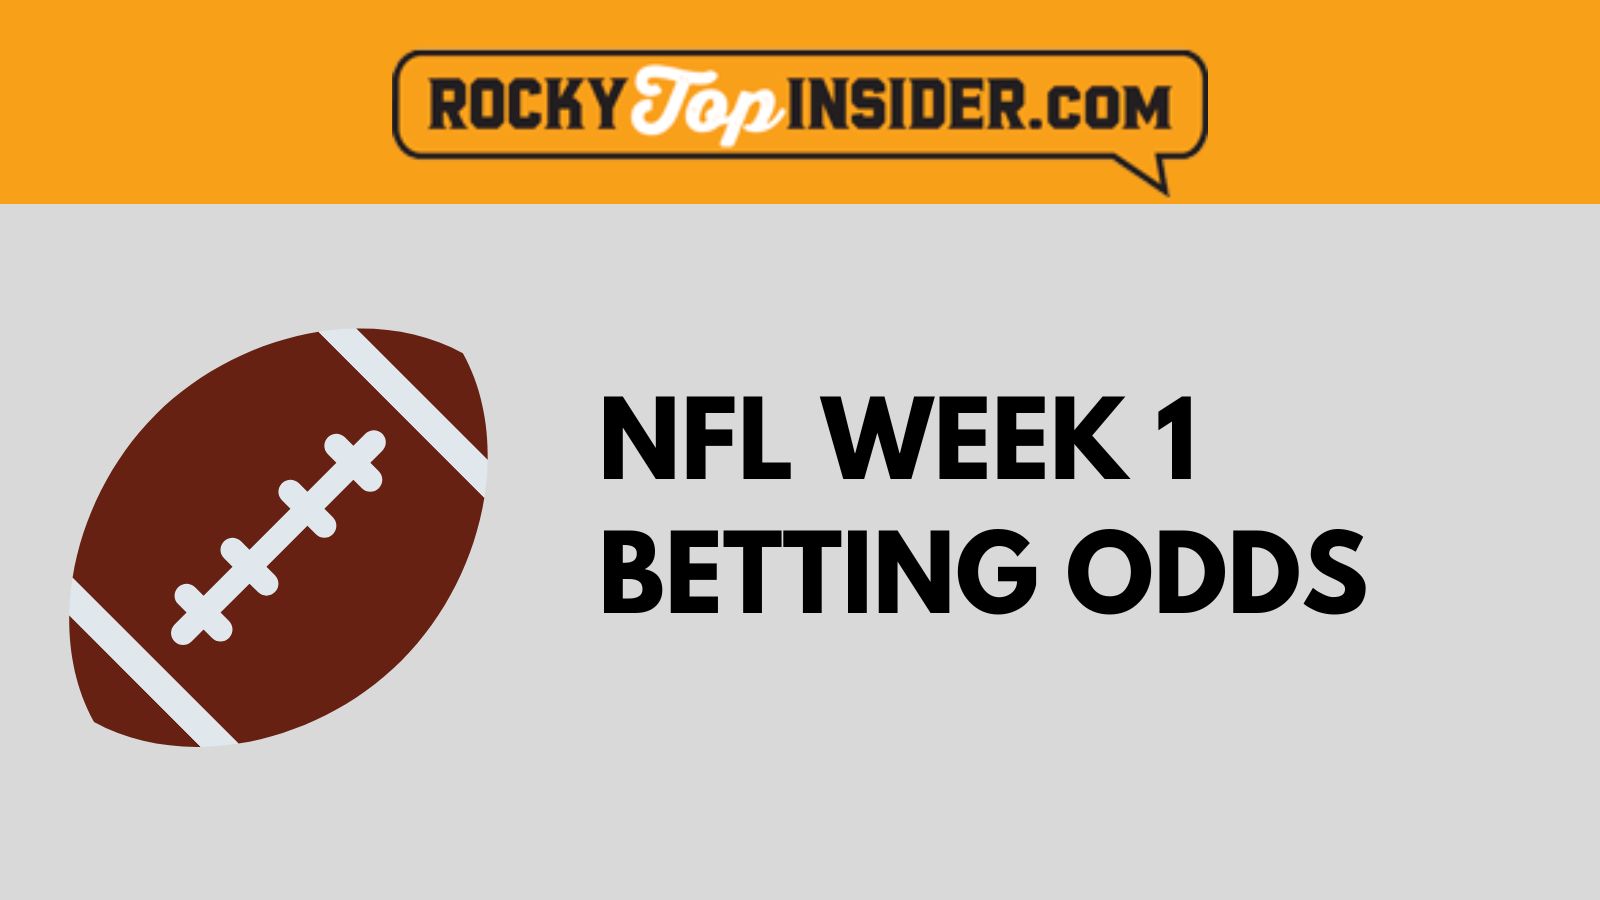 NFL Week 1 Betting Odds: Chiefs Favored While Jets Catch Points